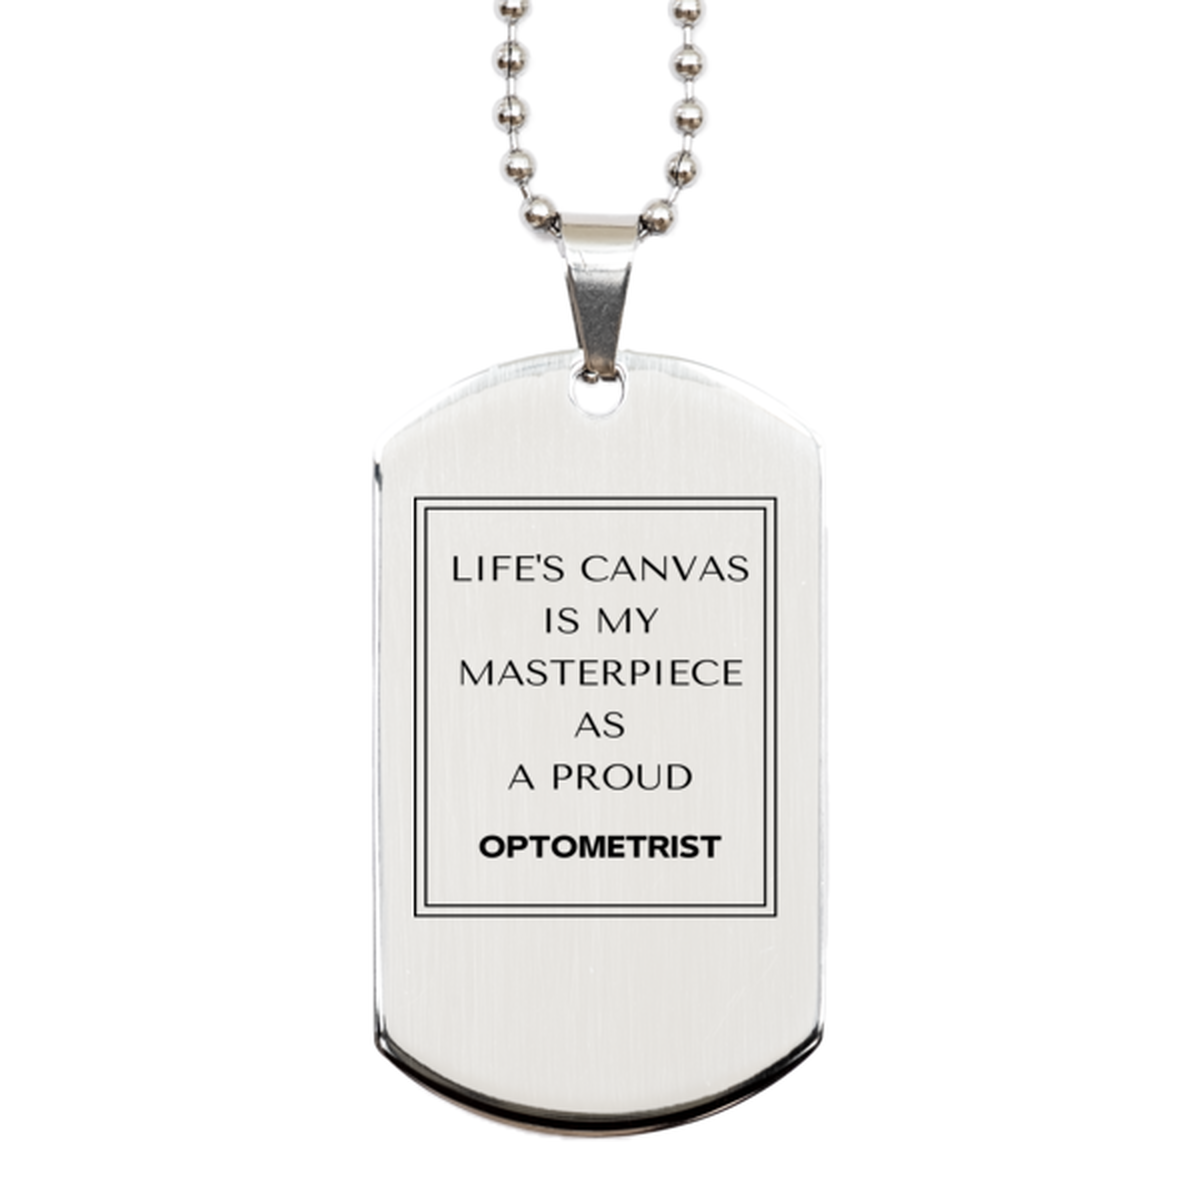 Proud Optometrist Gifts, Life's canvas is my masterpiece, Epic Birthday Christmas Unique Silver Dog Tag For Optometrist, Coworkers, Men, Women, Friends